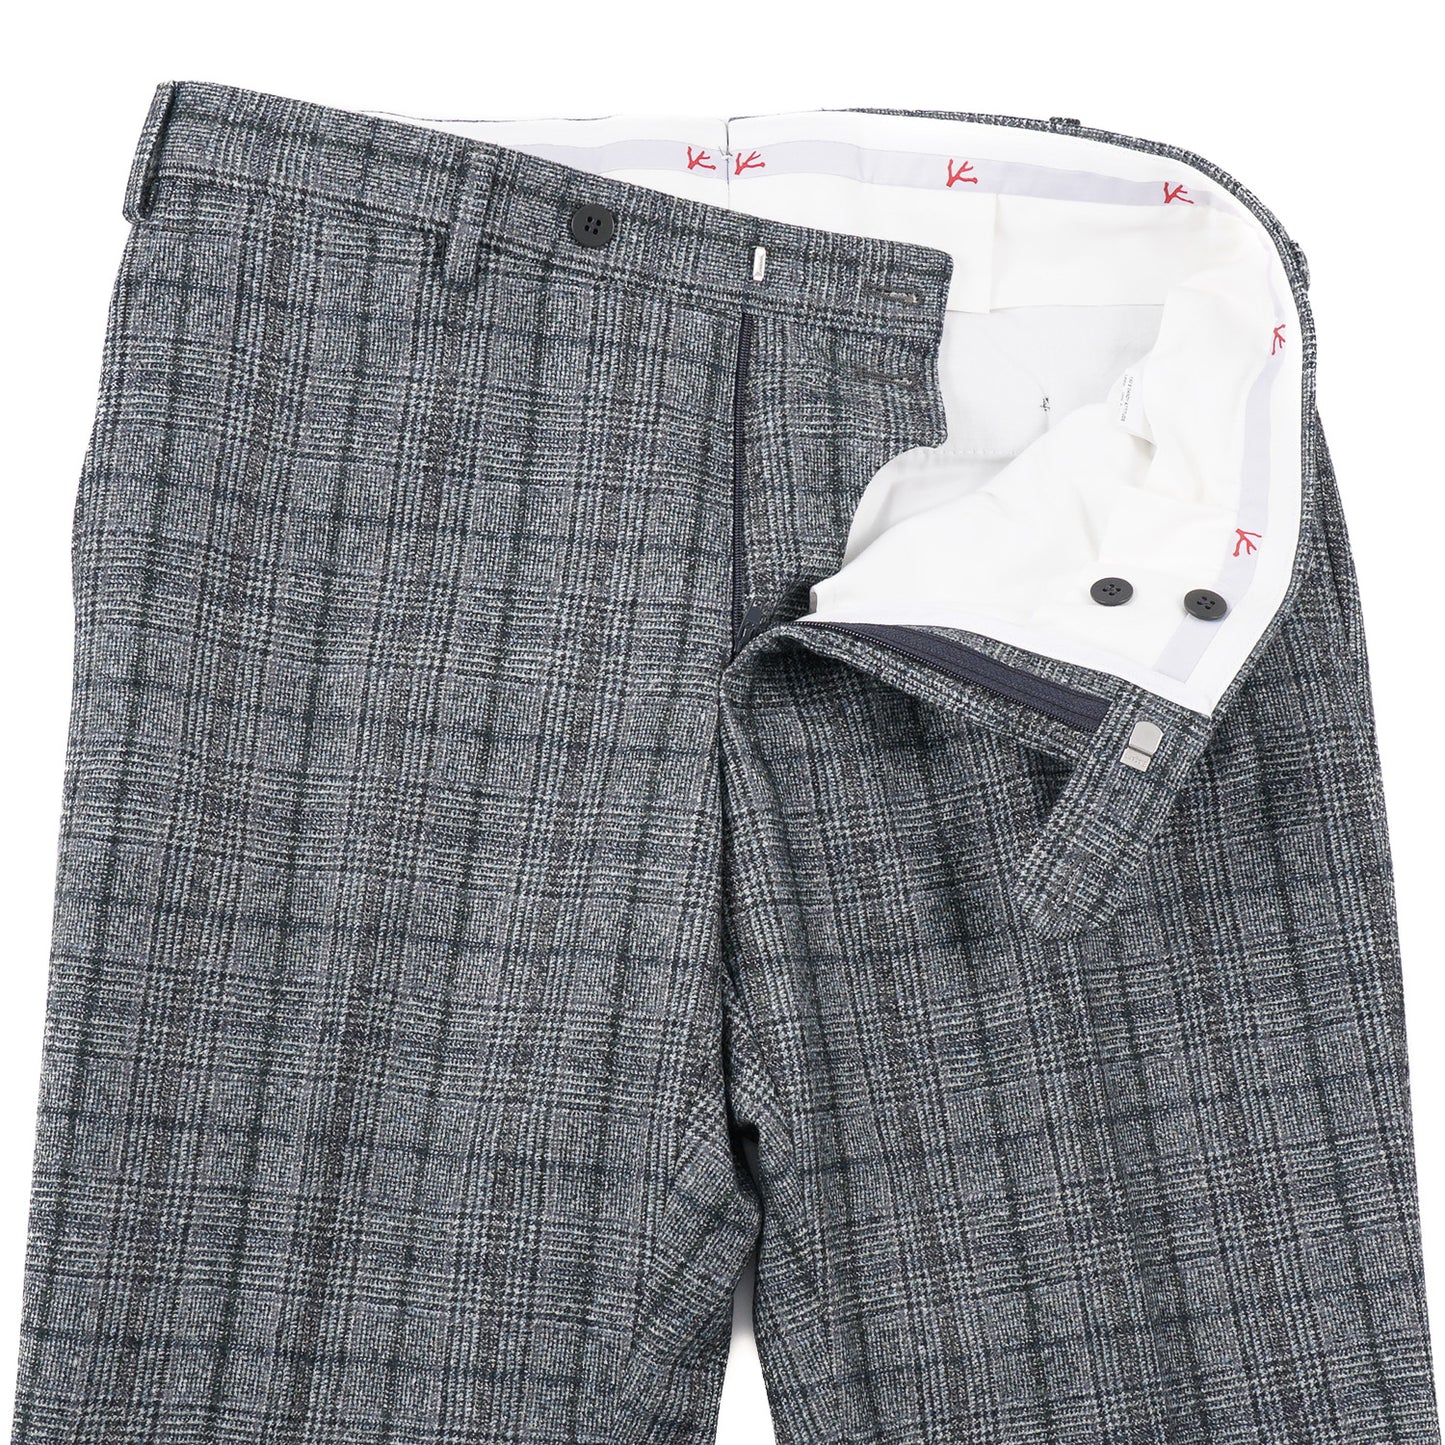 Isaia Slim-Fit Soft Flannel Wool Suit - Top Shelf Apparel